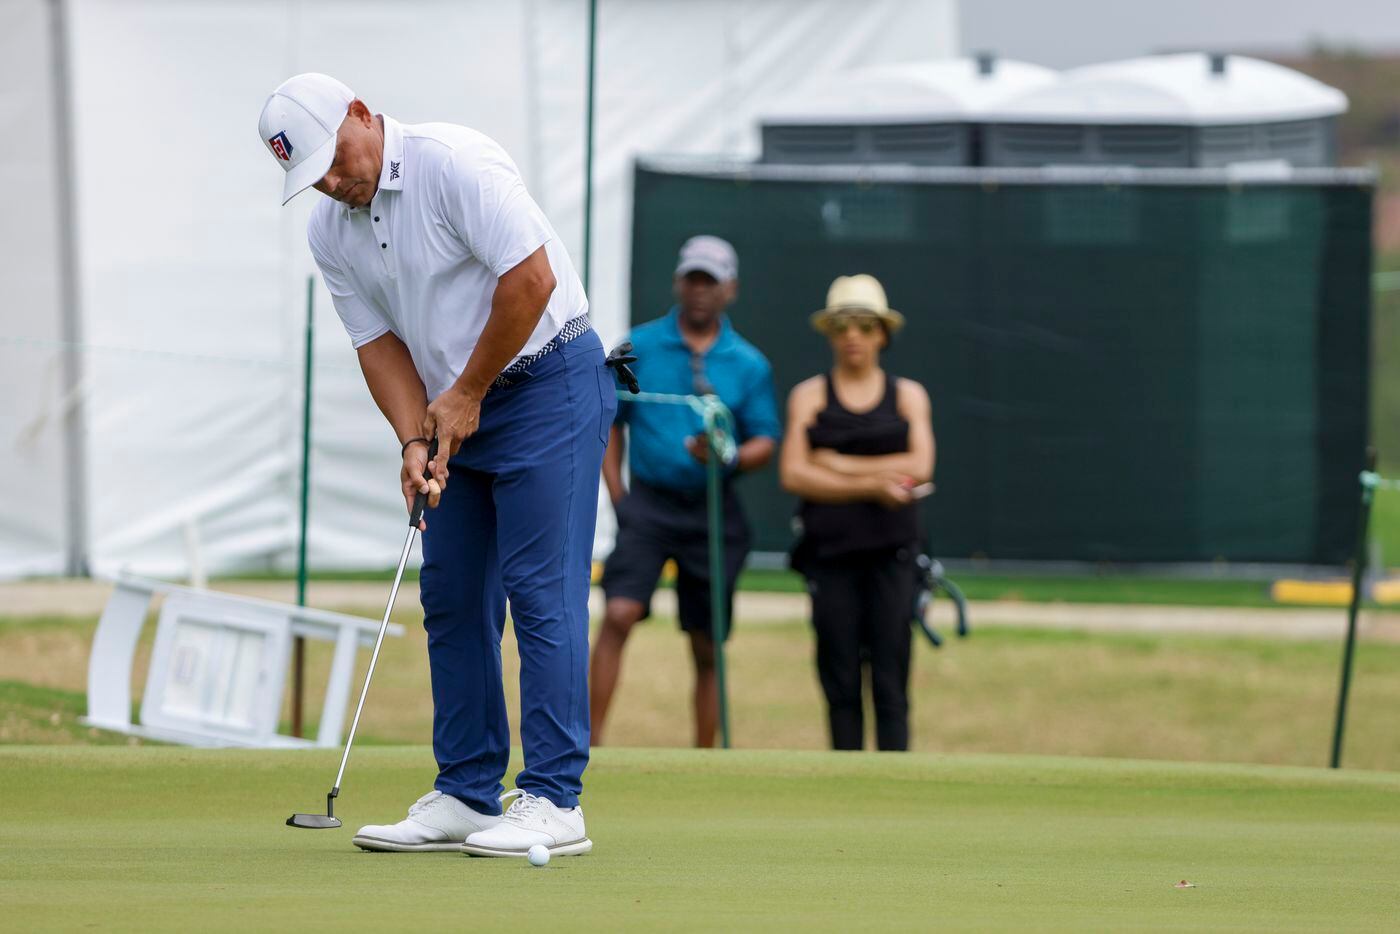 MLB Hall of Fame catcher Ivan "Pudge" Rodriguez putts the ball on the ninth green during the...